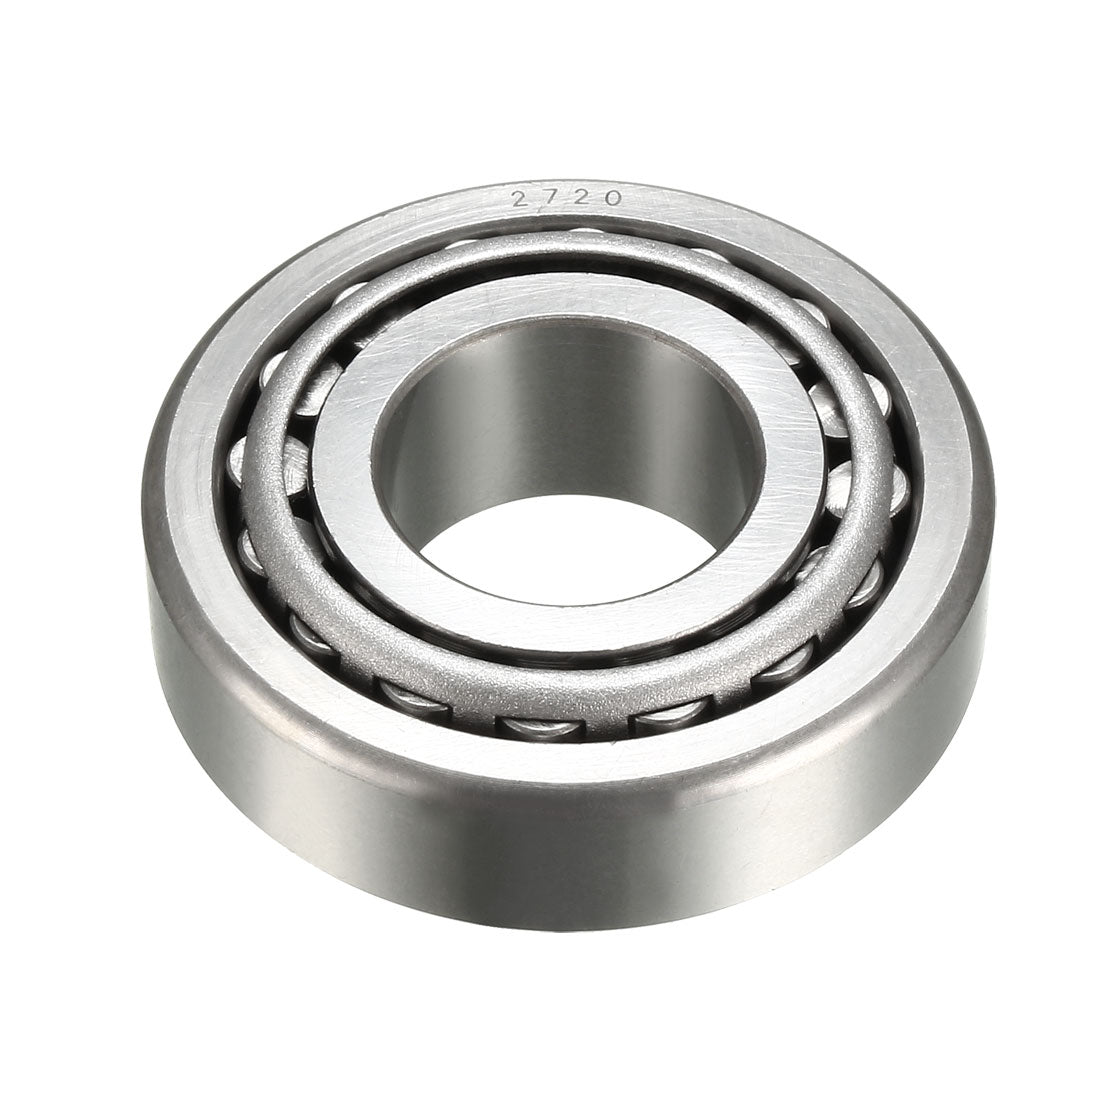 Uxcell Uxcell 3780/3720 Tapered Roller Bearing Cone and Cup Set 2" Bore 3.6718" O.D.